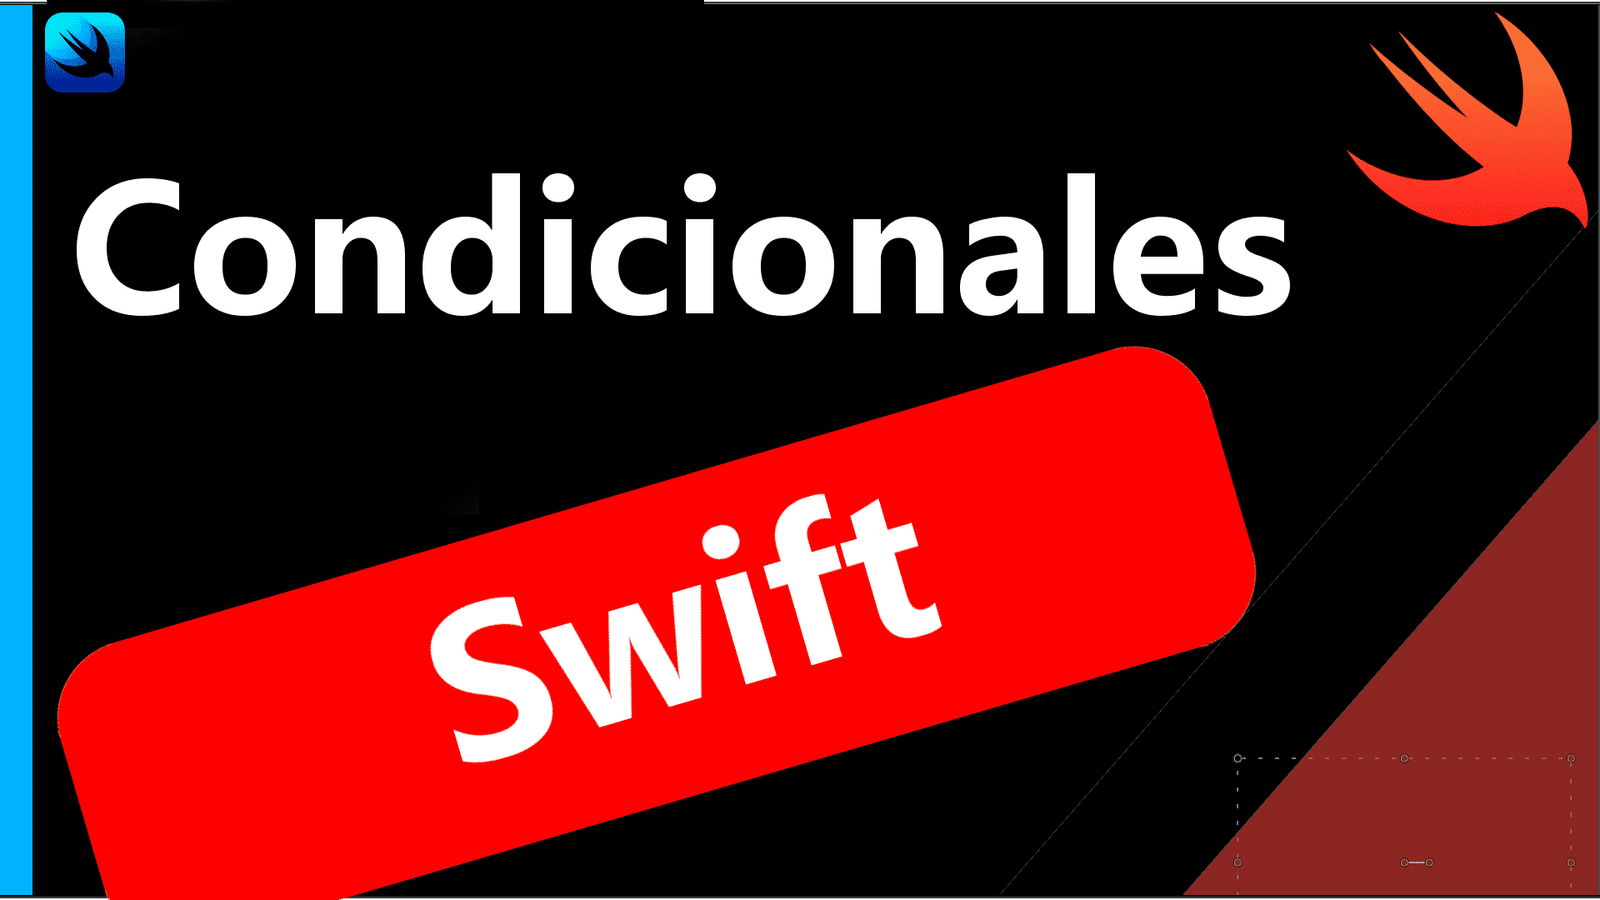 Control or conditional structures in Swift